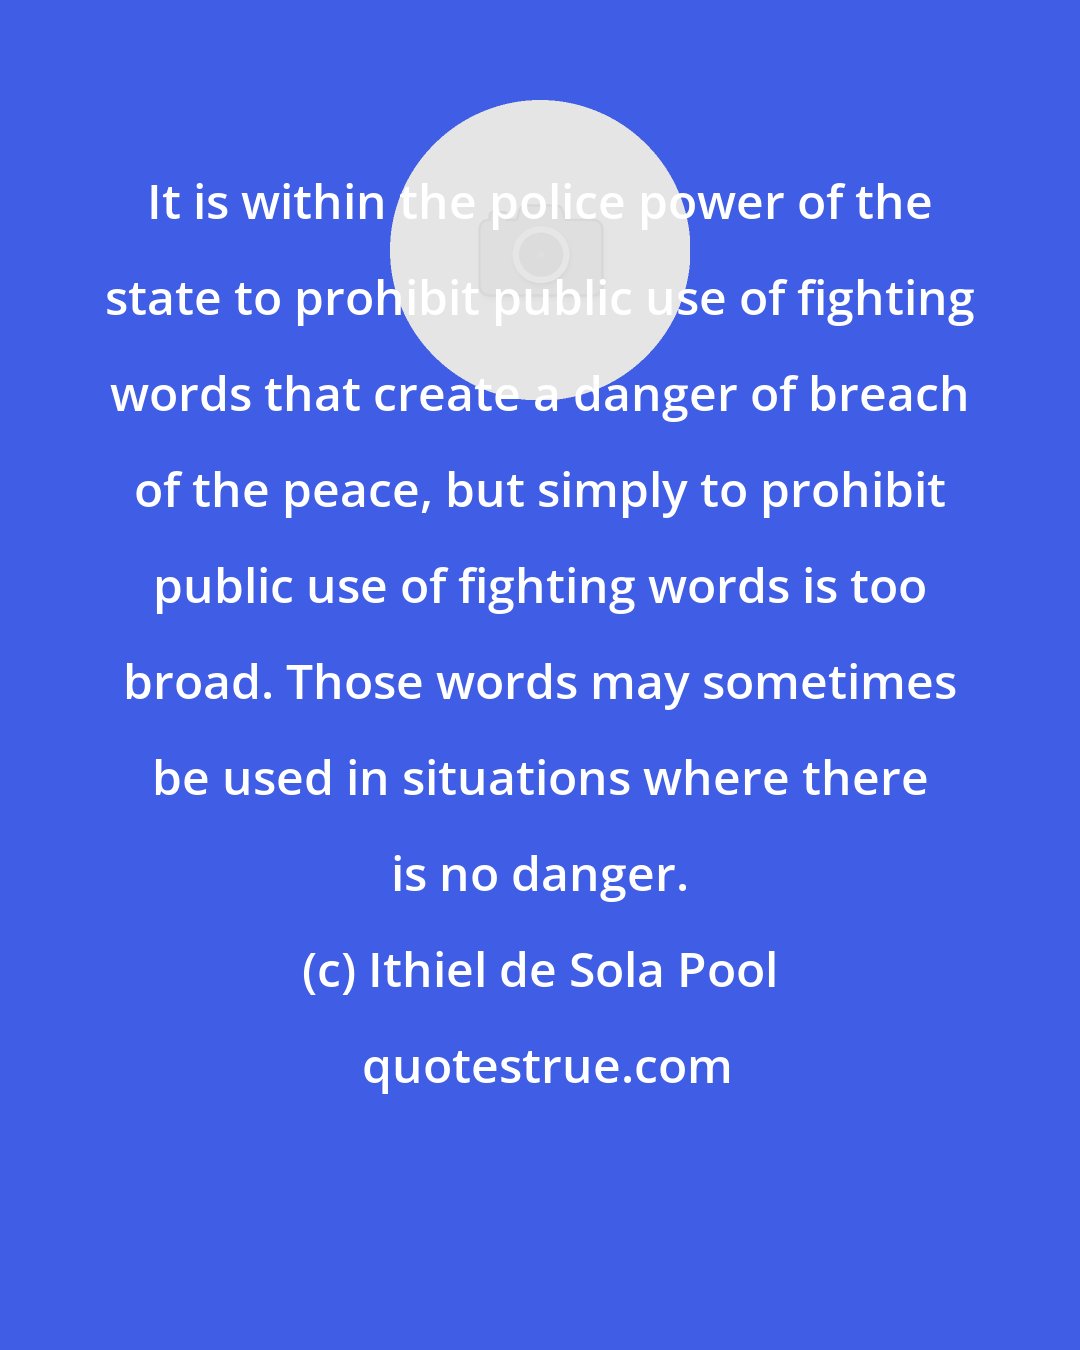 Ithiel de Sola Pool: It is within the police power of the state to prohibit public use of fighting words that create a danger of breach of the peace, but simply to prohibit public use of fighting words is too broad. Those words may sometimes be used in situations where there is no danger.